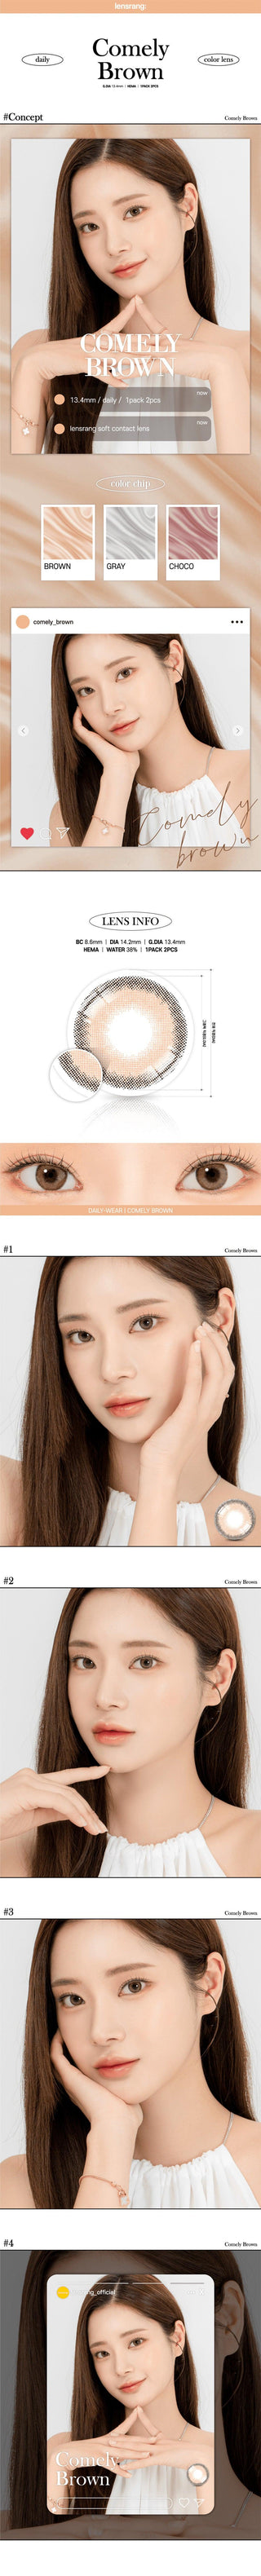 Model demonstrating a Kpop-inspired look with Lensrang Comely Brown coloured contact lenses, demonstrating the brightening and enlarging effect of the circle contact lenses on her dark eyes.